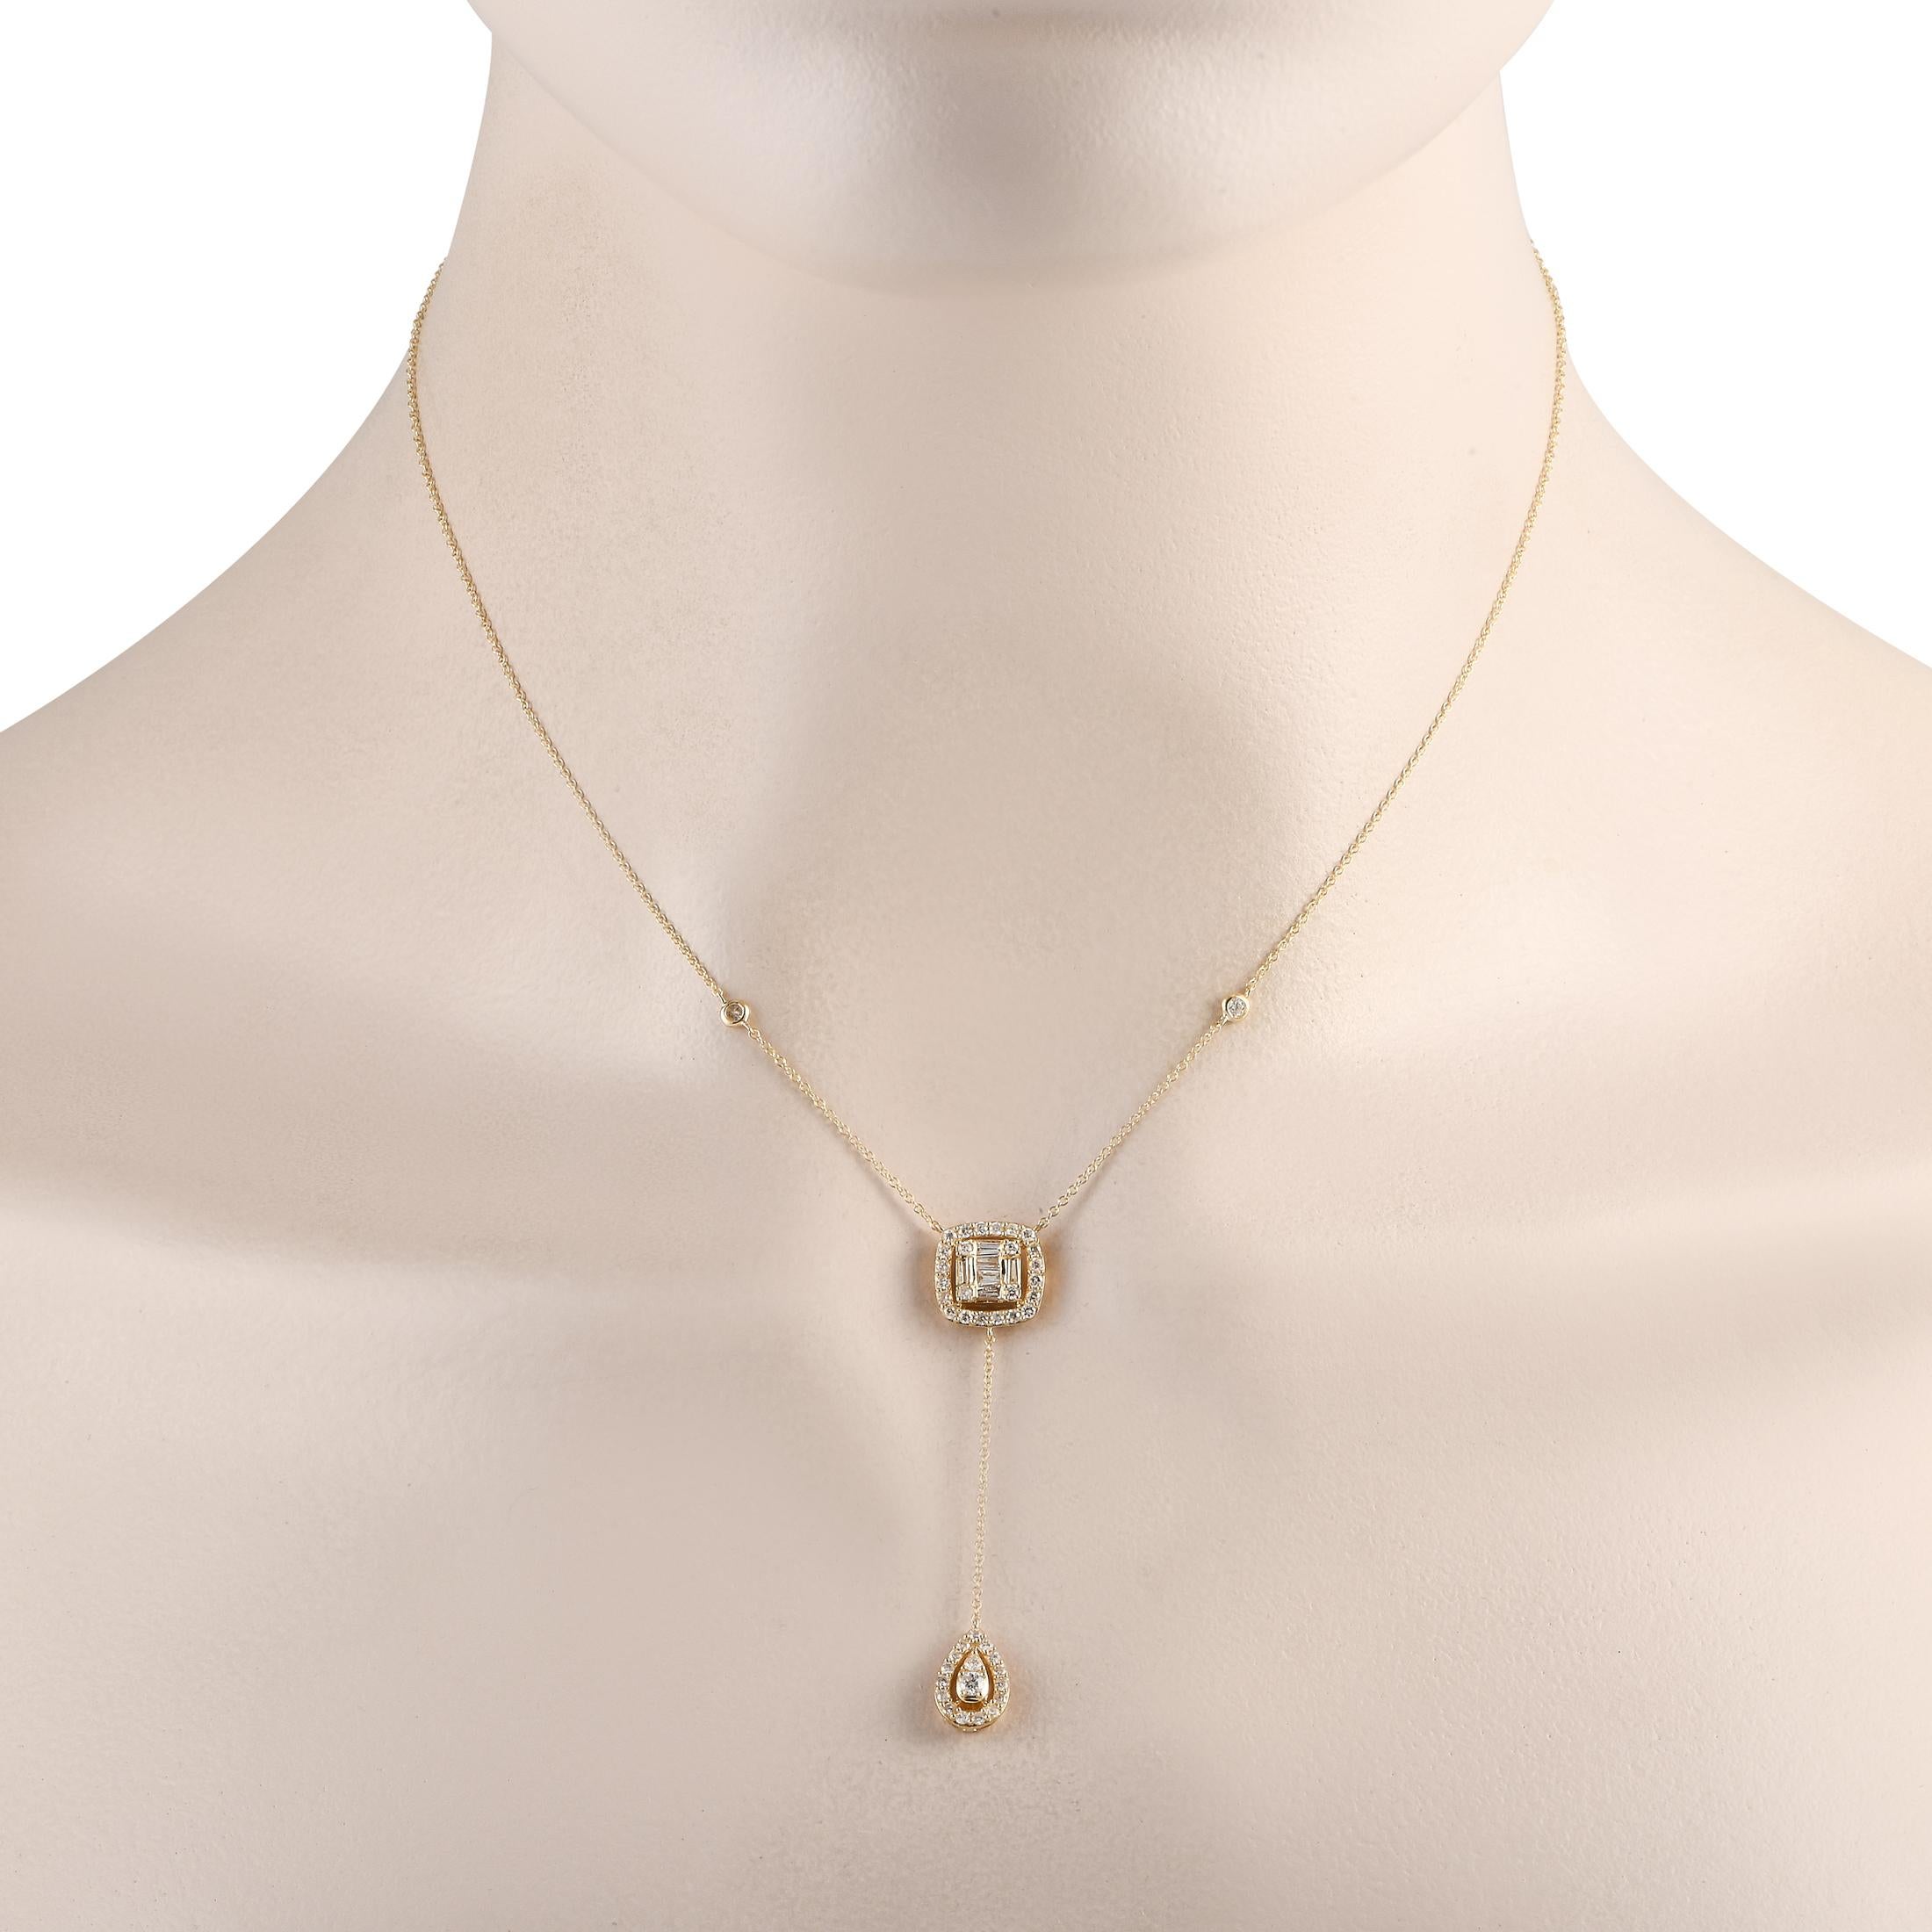 This delicate necklace will add the perfect finishing touch to any ensemble. Crafted from 14K Yellow Gold, the 15 chain includes a dangling pendant measuring 2 long. Sparkling Diamonds totaling 0.65 carats provide an additional touch of luxury.This